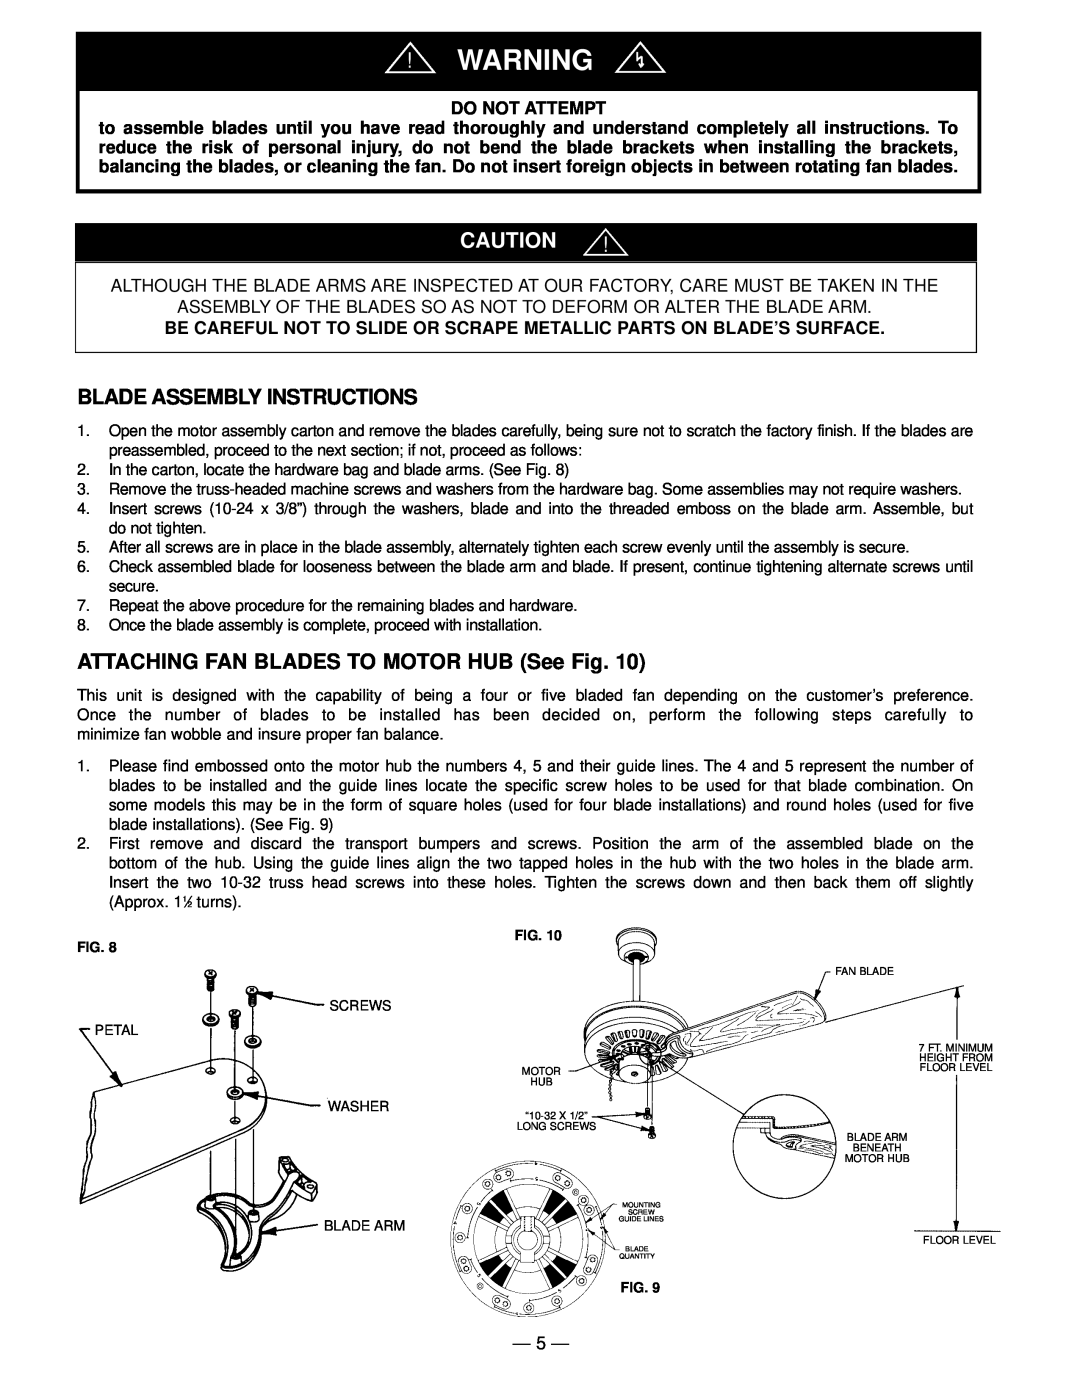 Marley Engineered Products 994 manual Blade Assembly Instructions, ATTACHING FAN BLADES TO MOTOR HUB See Fig 